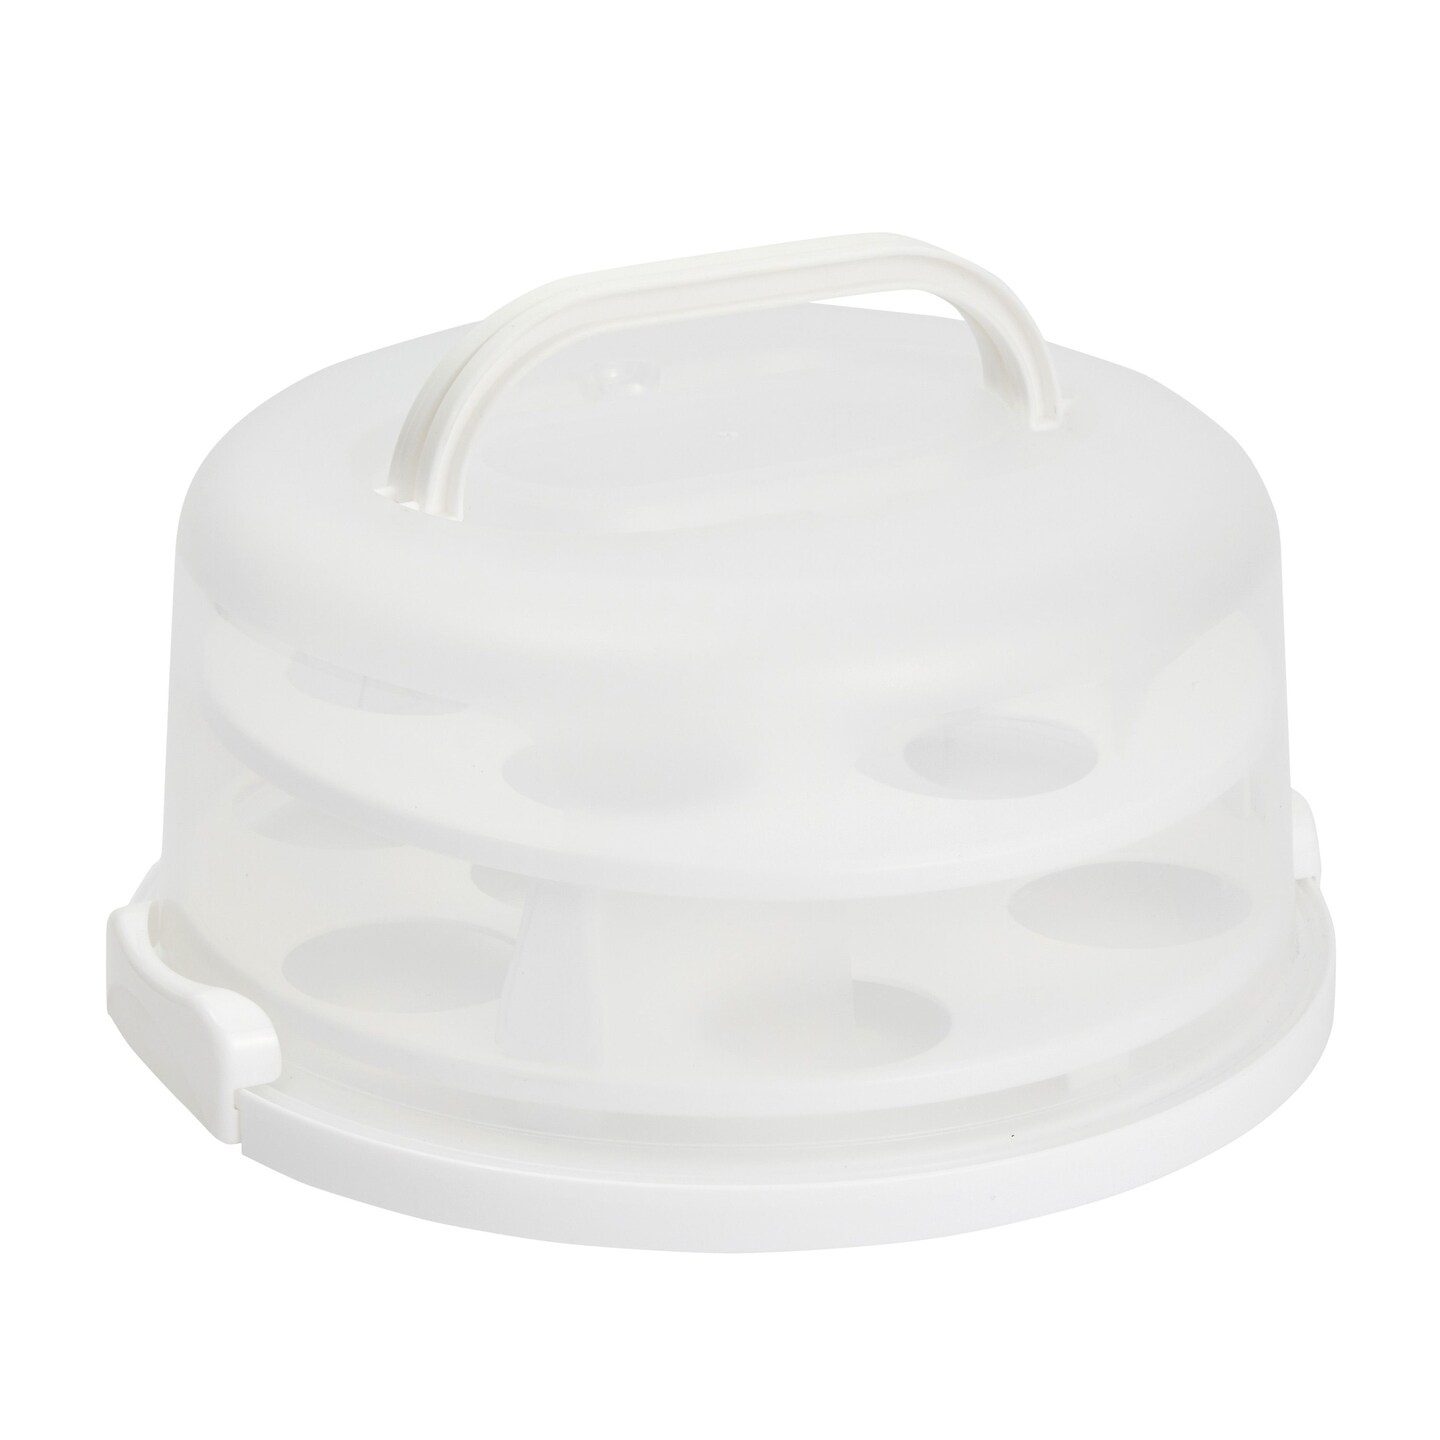 2-In-1 Round Cake Carrier with Lid for 10-Inch Pies, 14 Cupcakes (12 x 5.9 In)